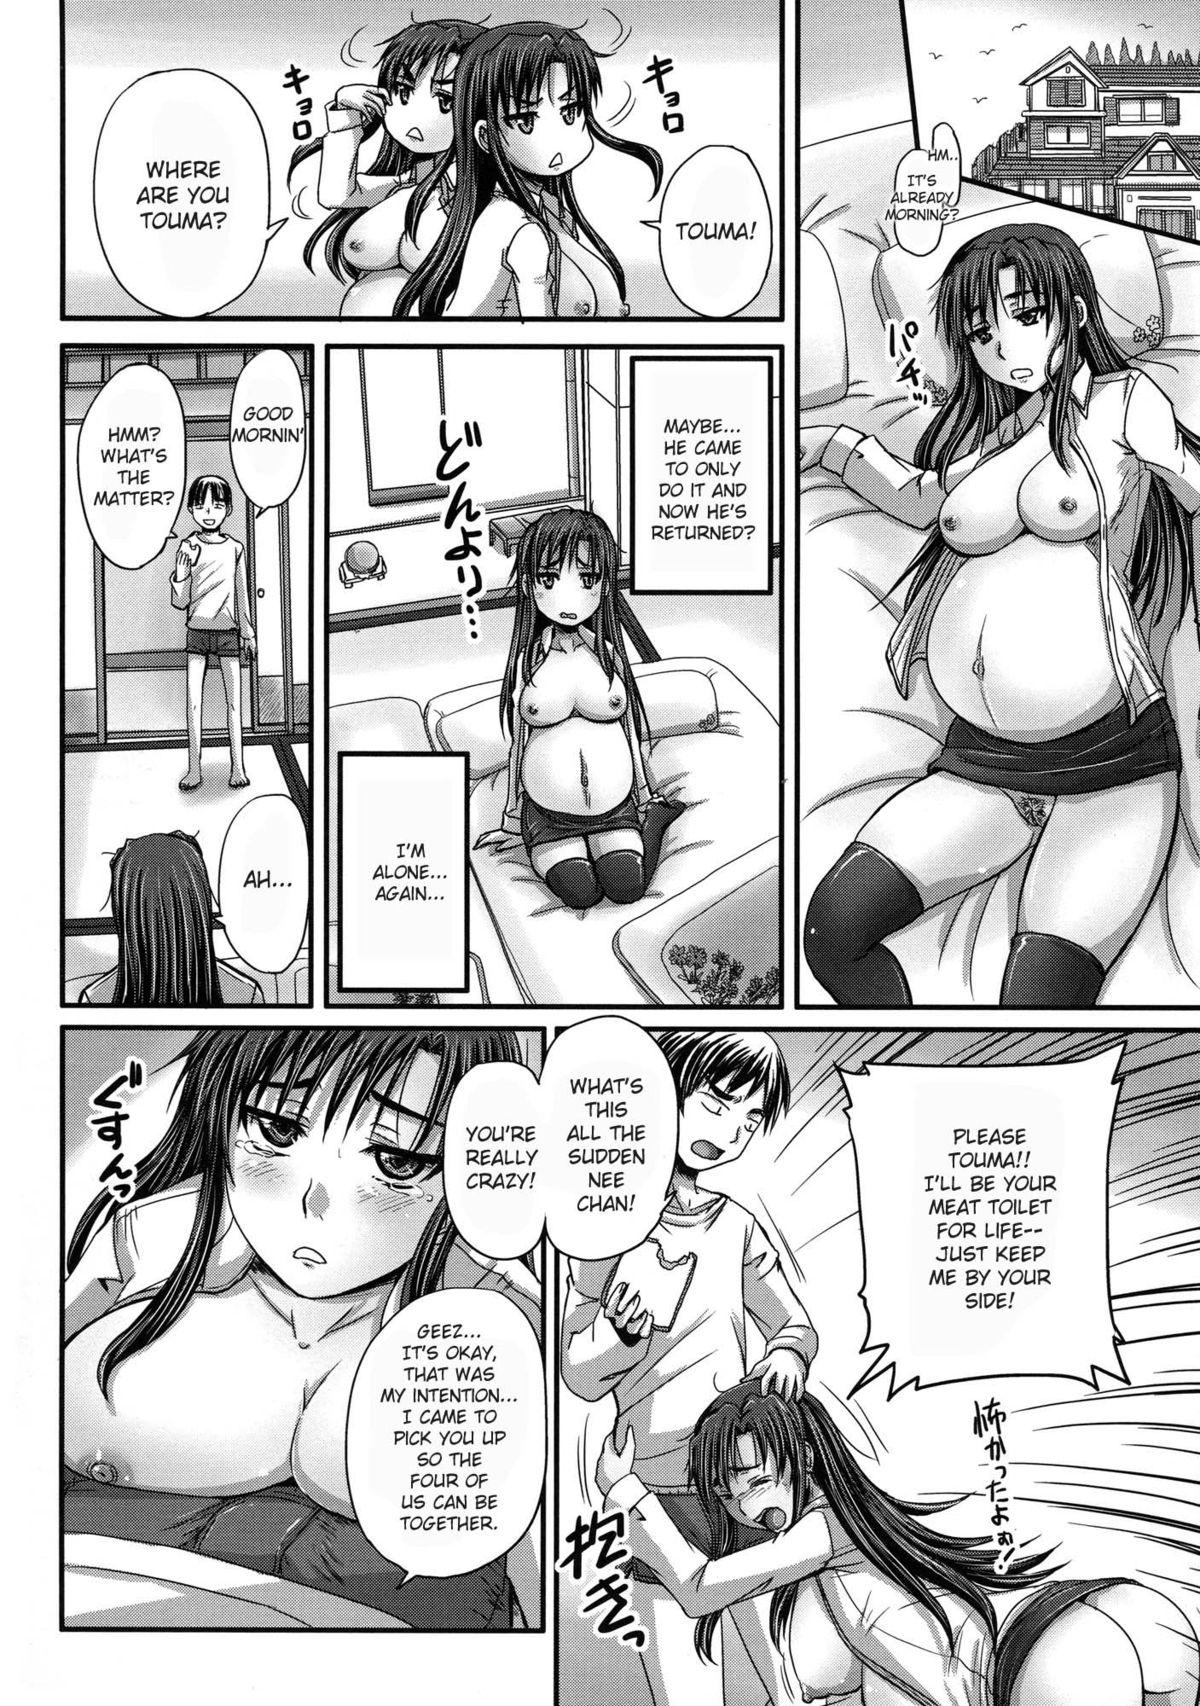 [Akigami Satoru] Tsukurou! Onaho Ane - Let's made a Sex Sleeve from Sister Ch. 1-2 [English] [snowshoes] 83